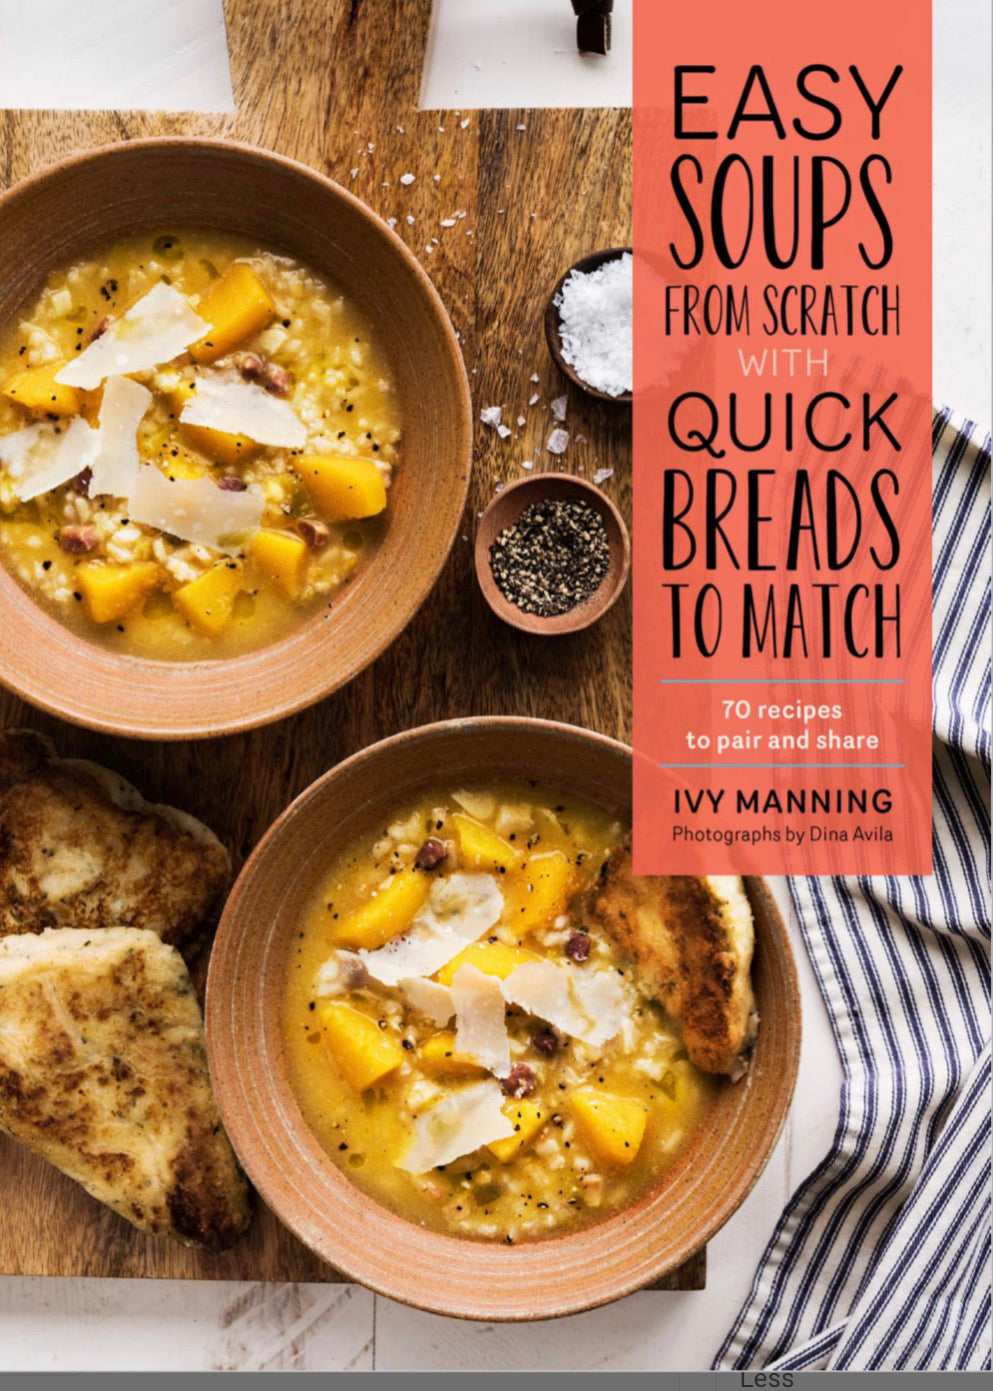 Easy Soups From Scratch with Quick Breads to Match